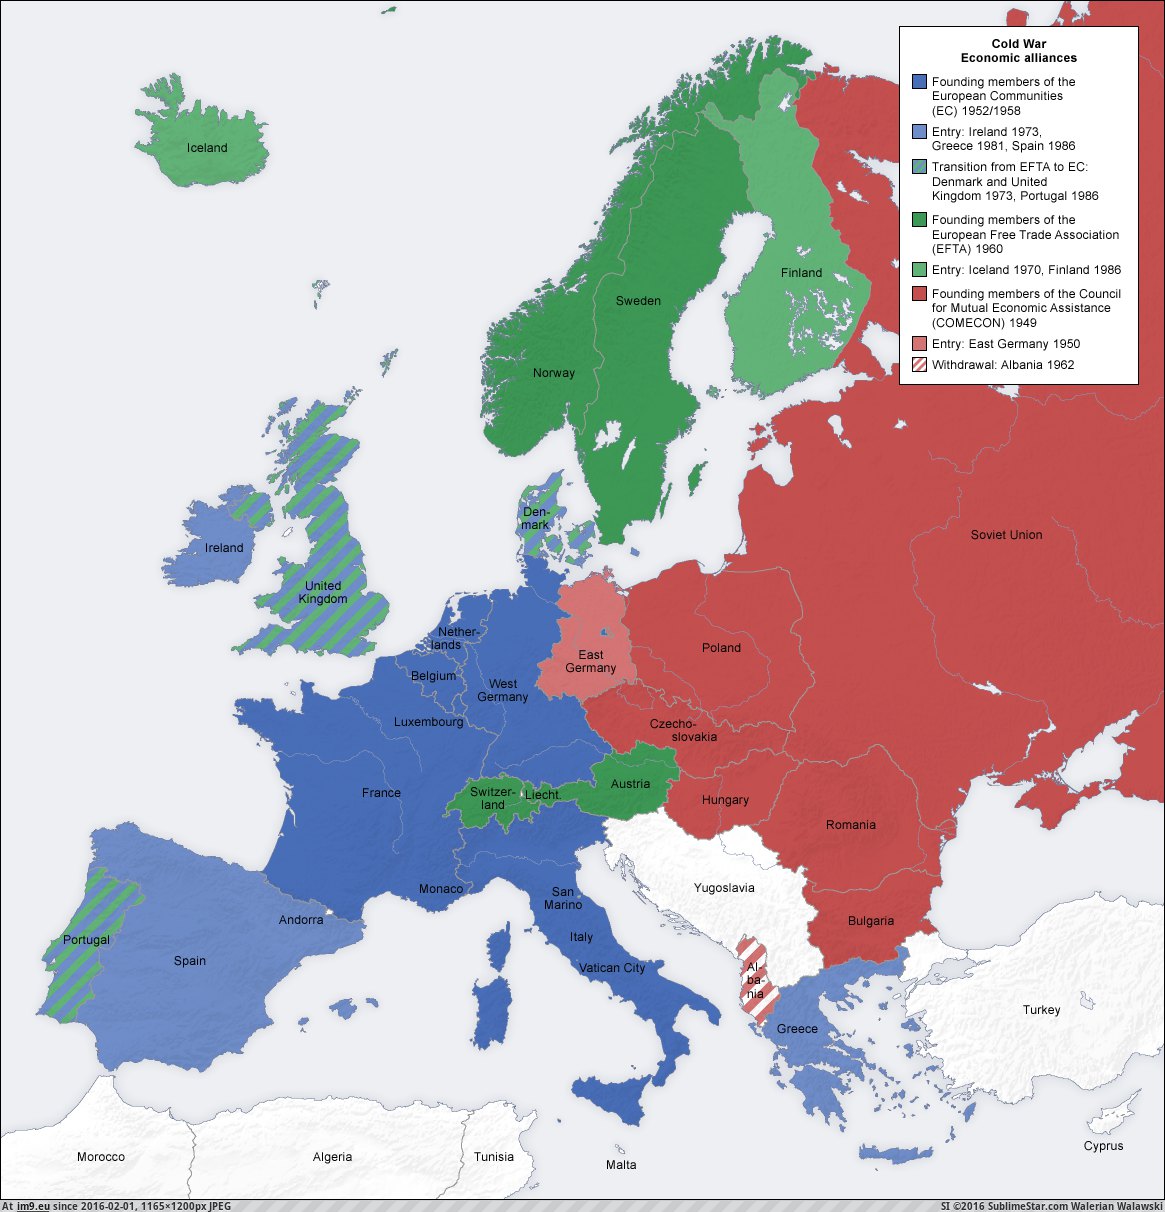 [Mapporn] Cold War Europe economic alliances [1165x1200] (in My r/MAPS favs)